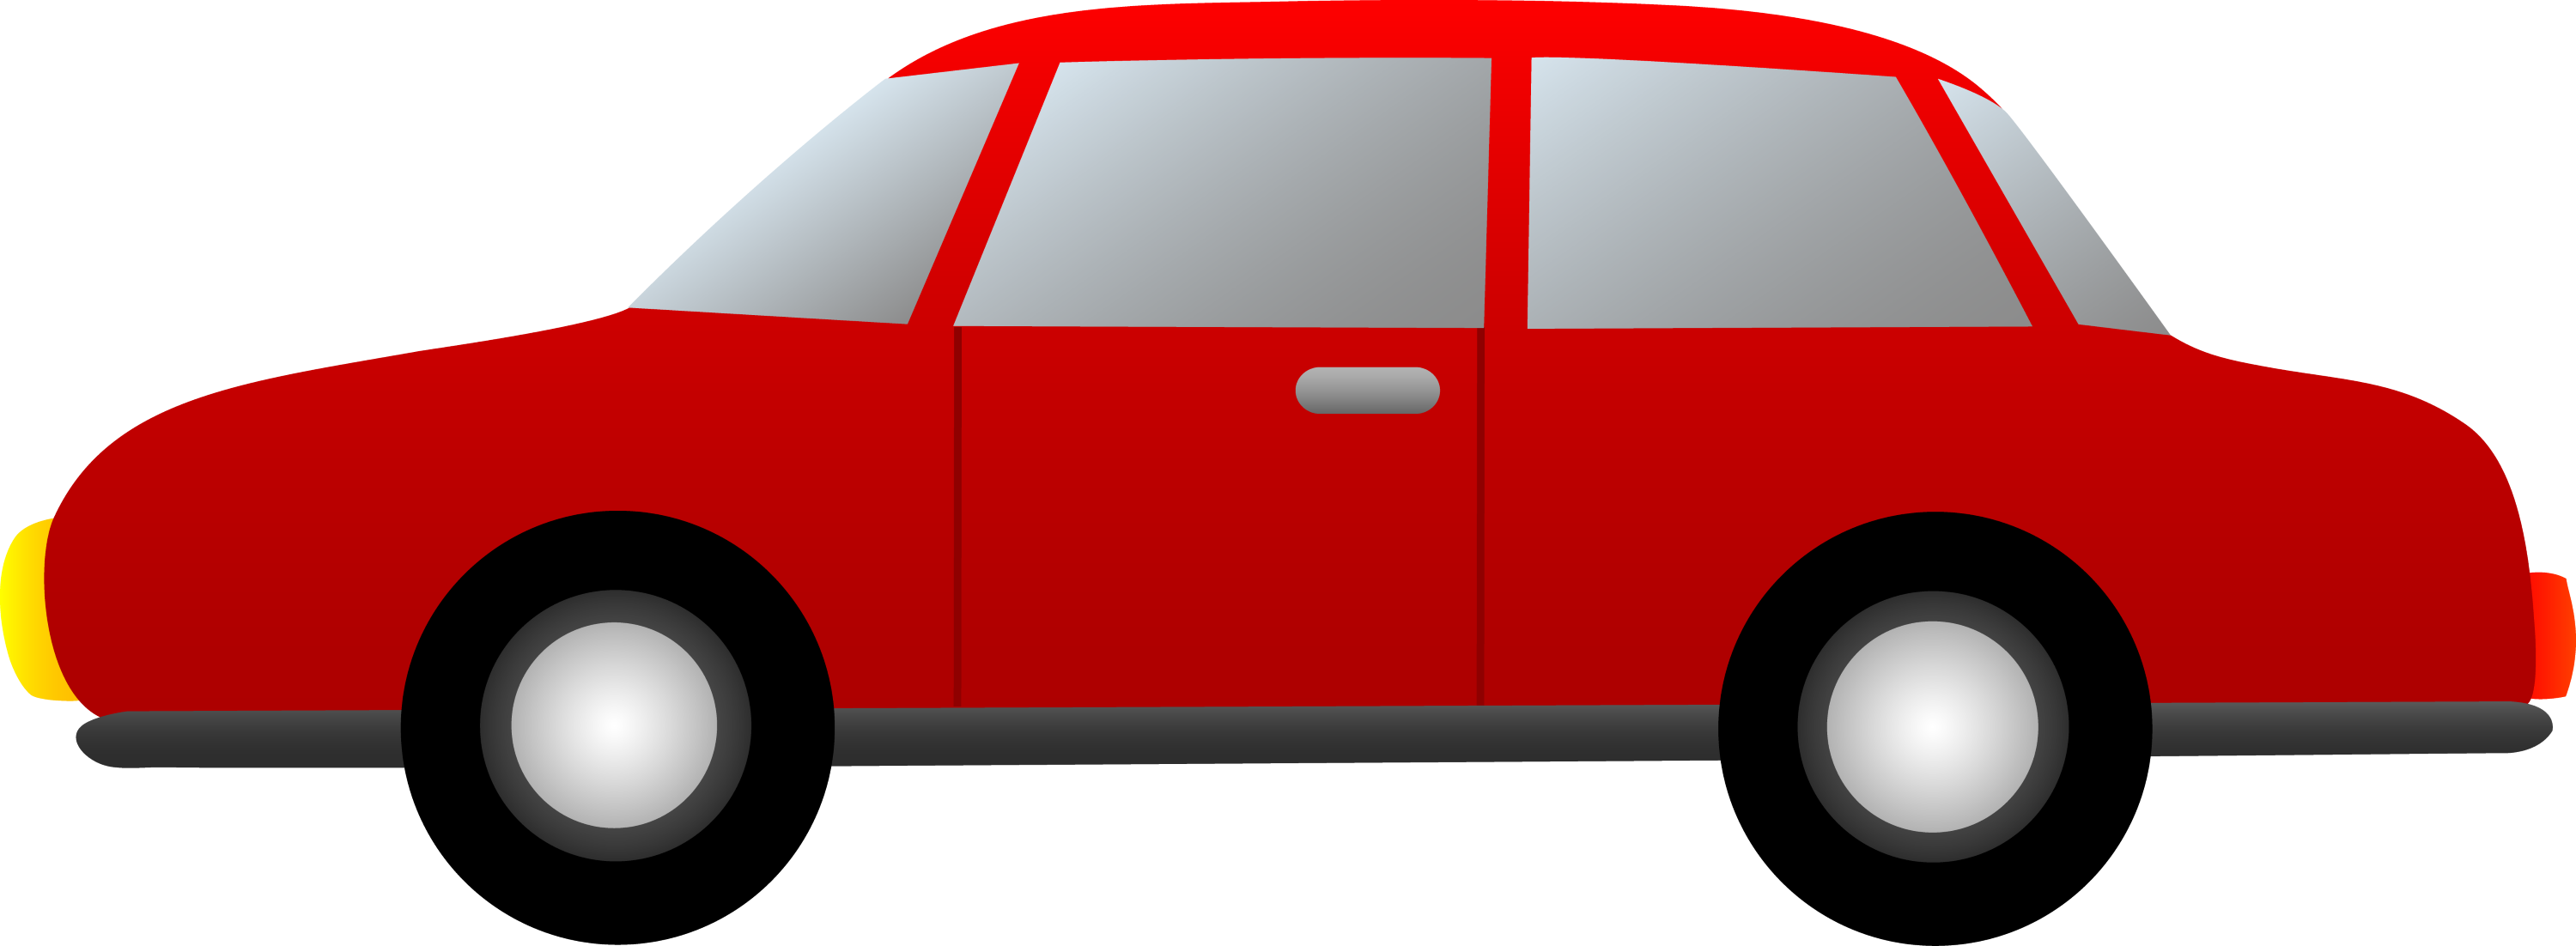 free red car clipart - photo #13